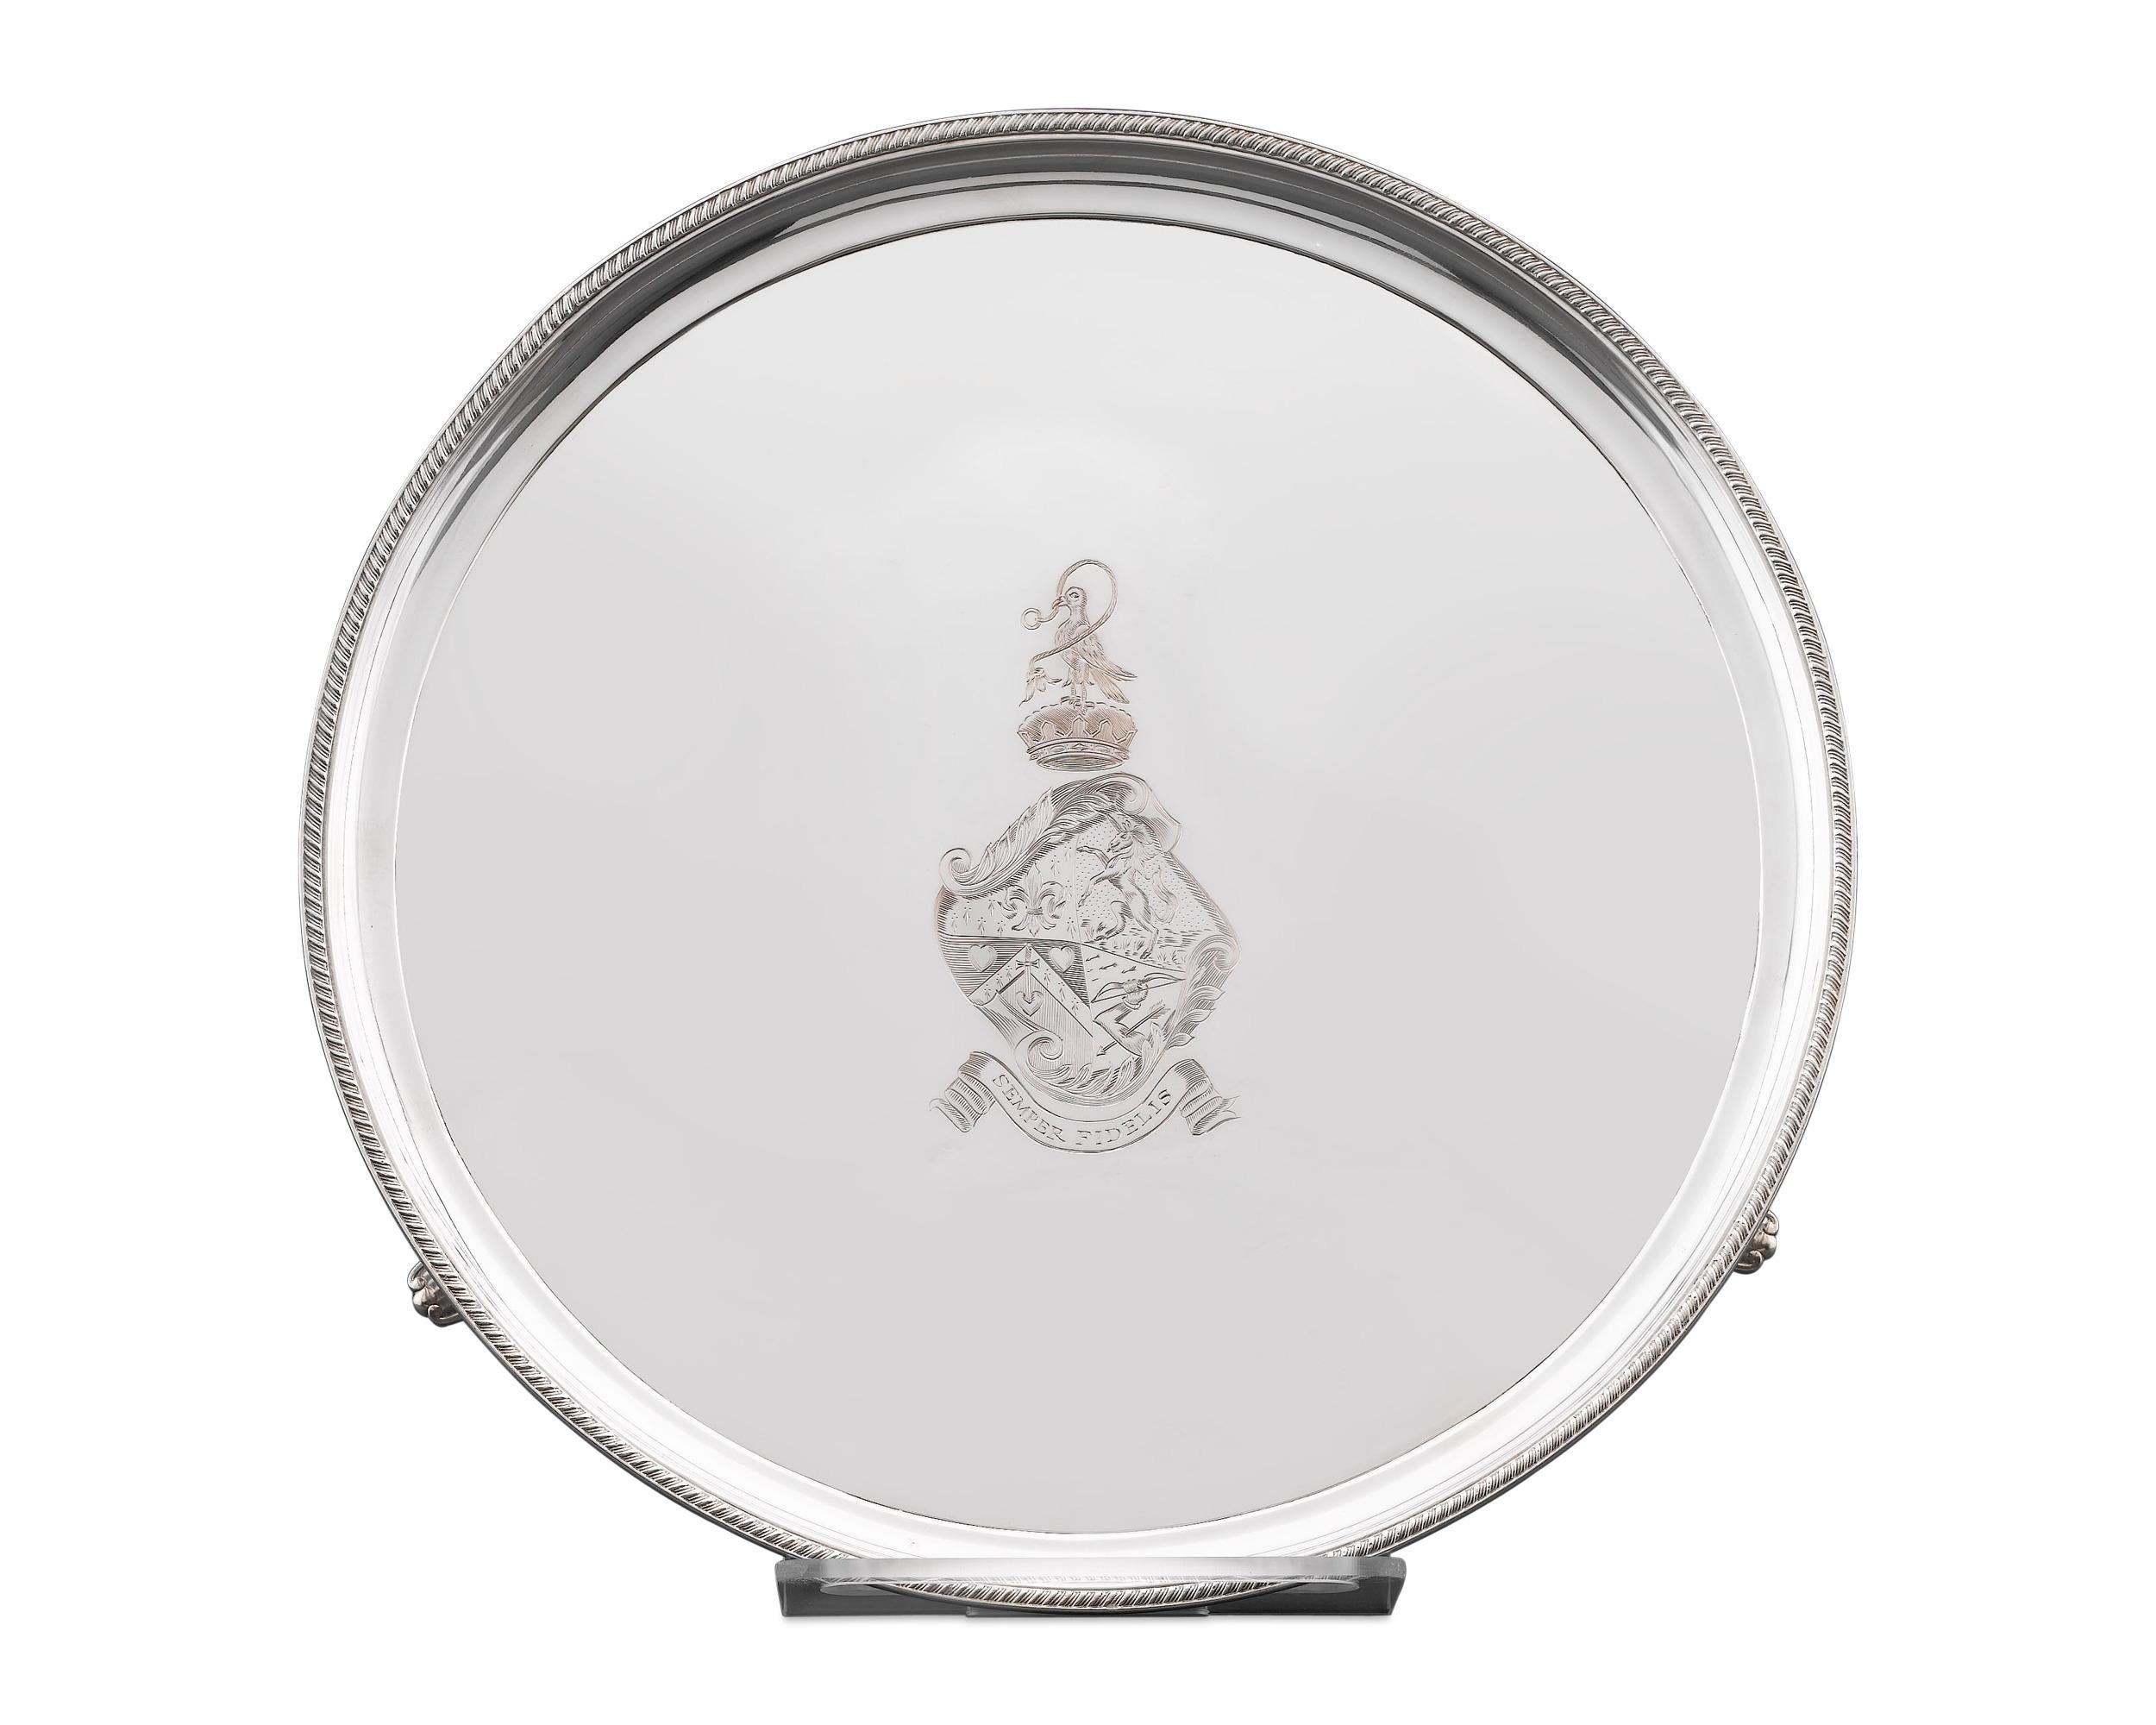 A rare and exceptional trophy, won by the thoroughbred personality at the 1970 Wood Memorial Stakes race held at the Aqueduct Racetrack. Beautifully crafted of plate silver, this exceptional platter is edged with an intricate gadrooned border and